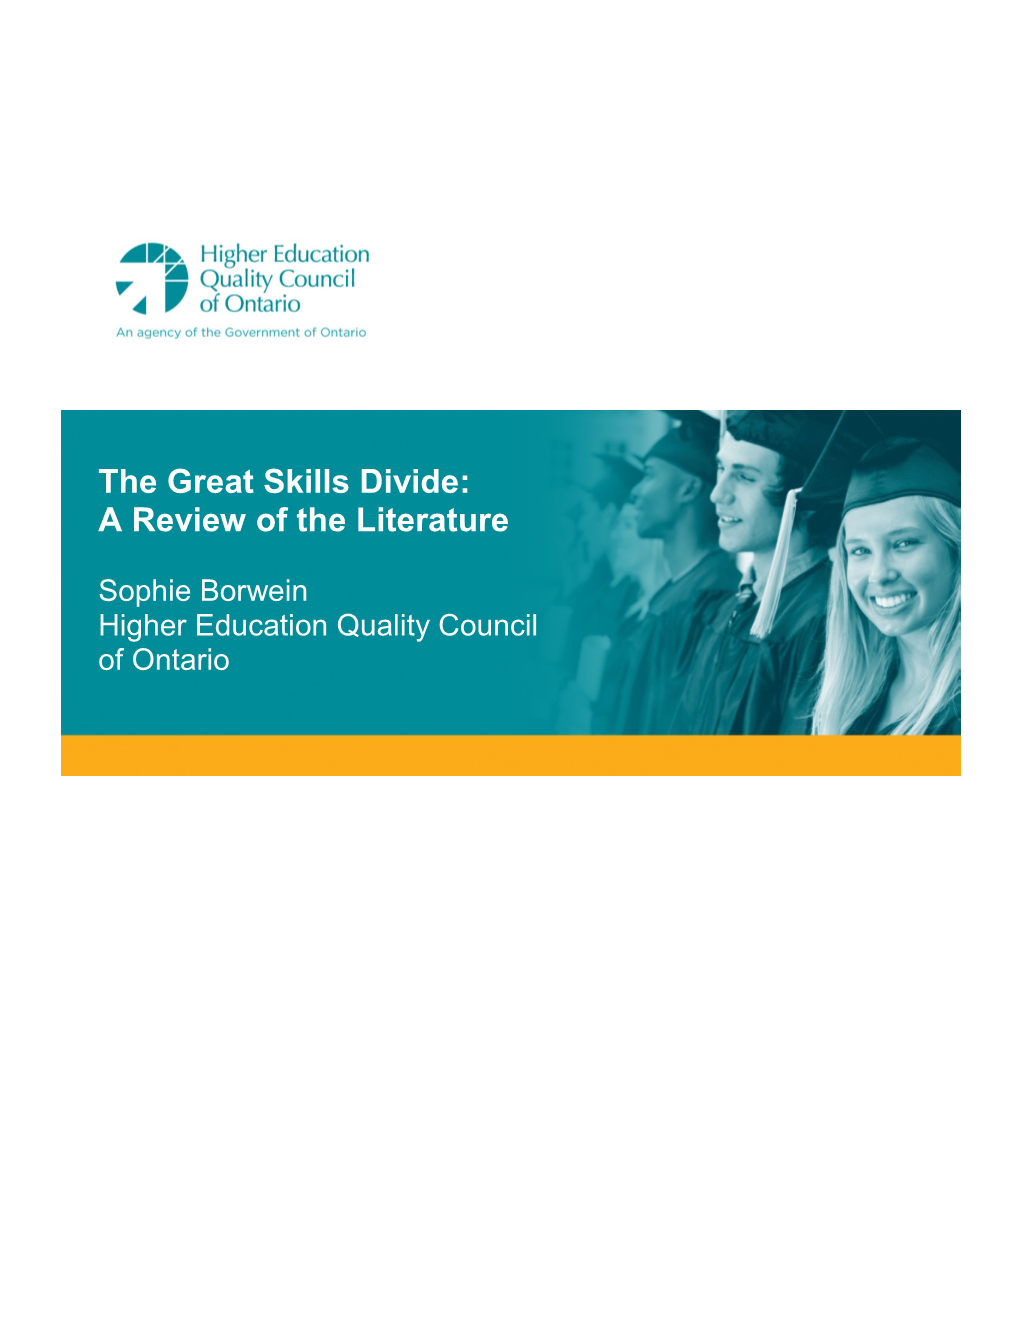 The Great Skills Divide: a Review of the Literature